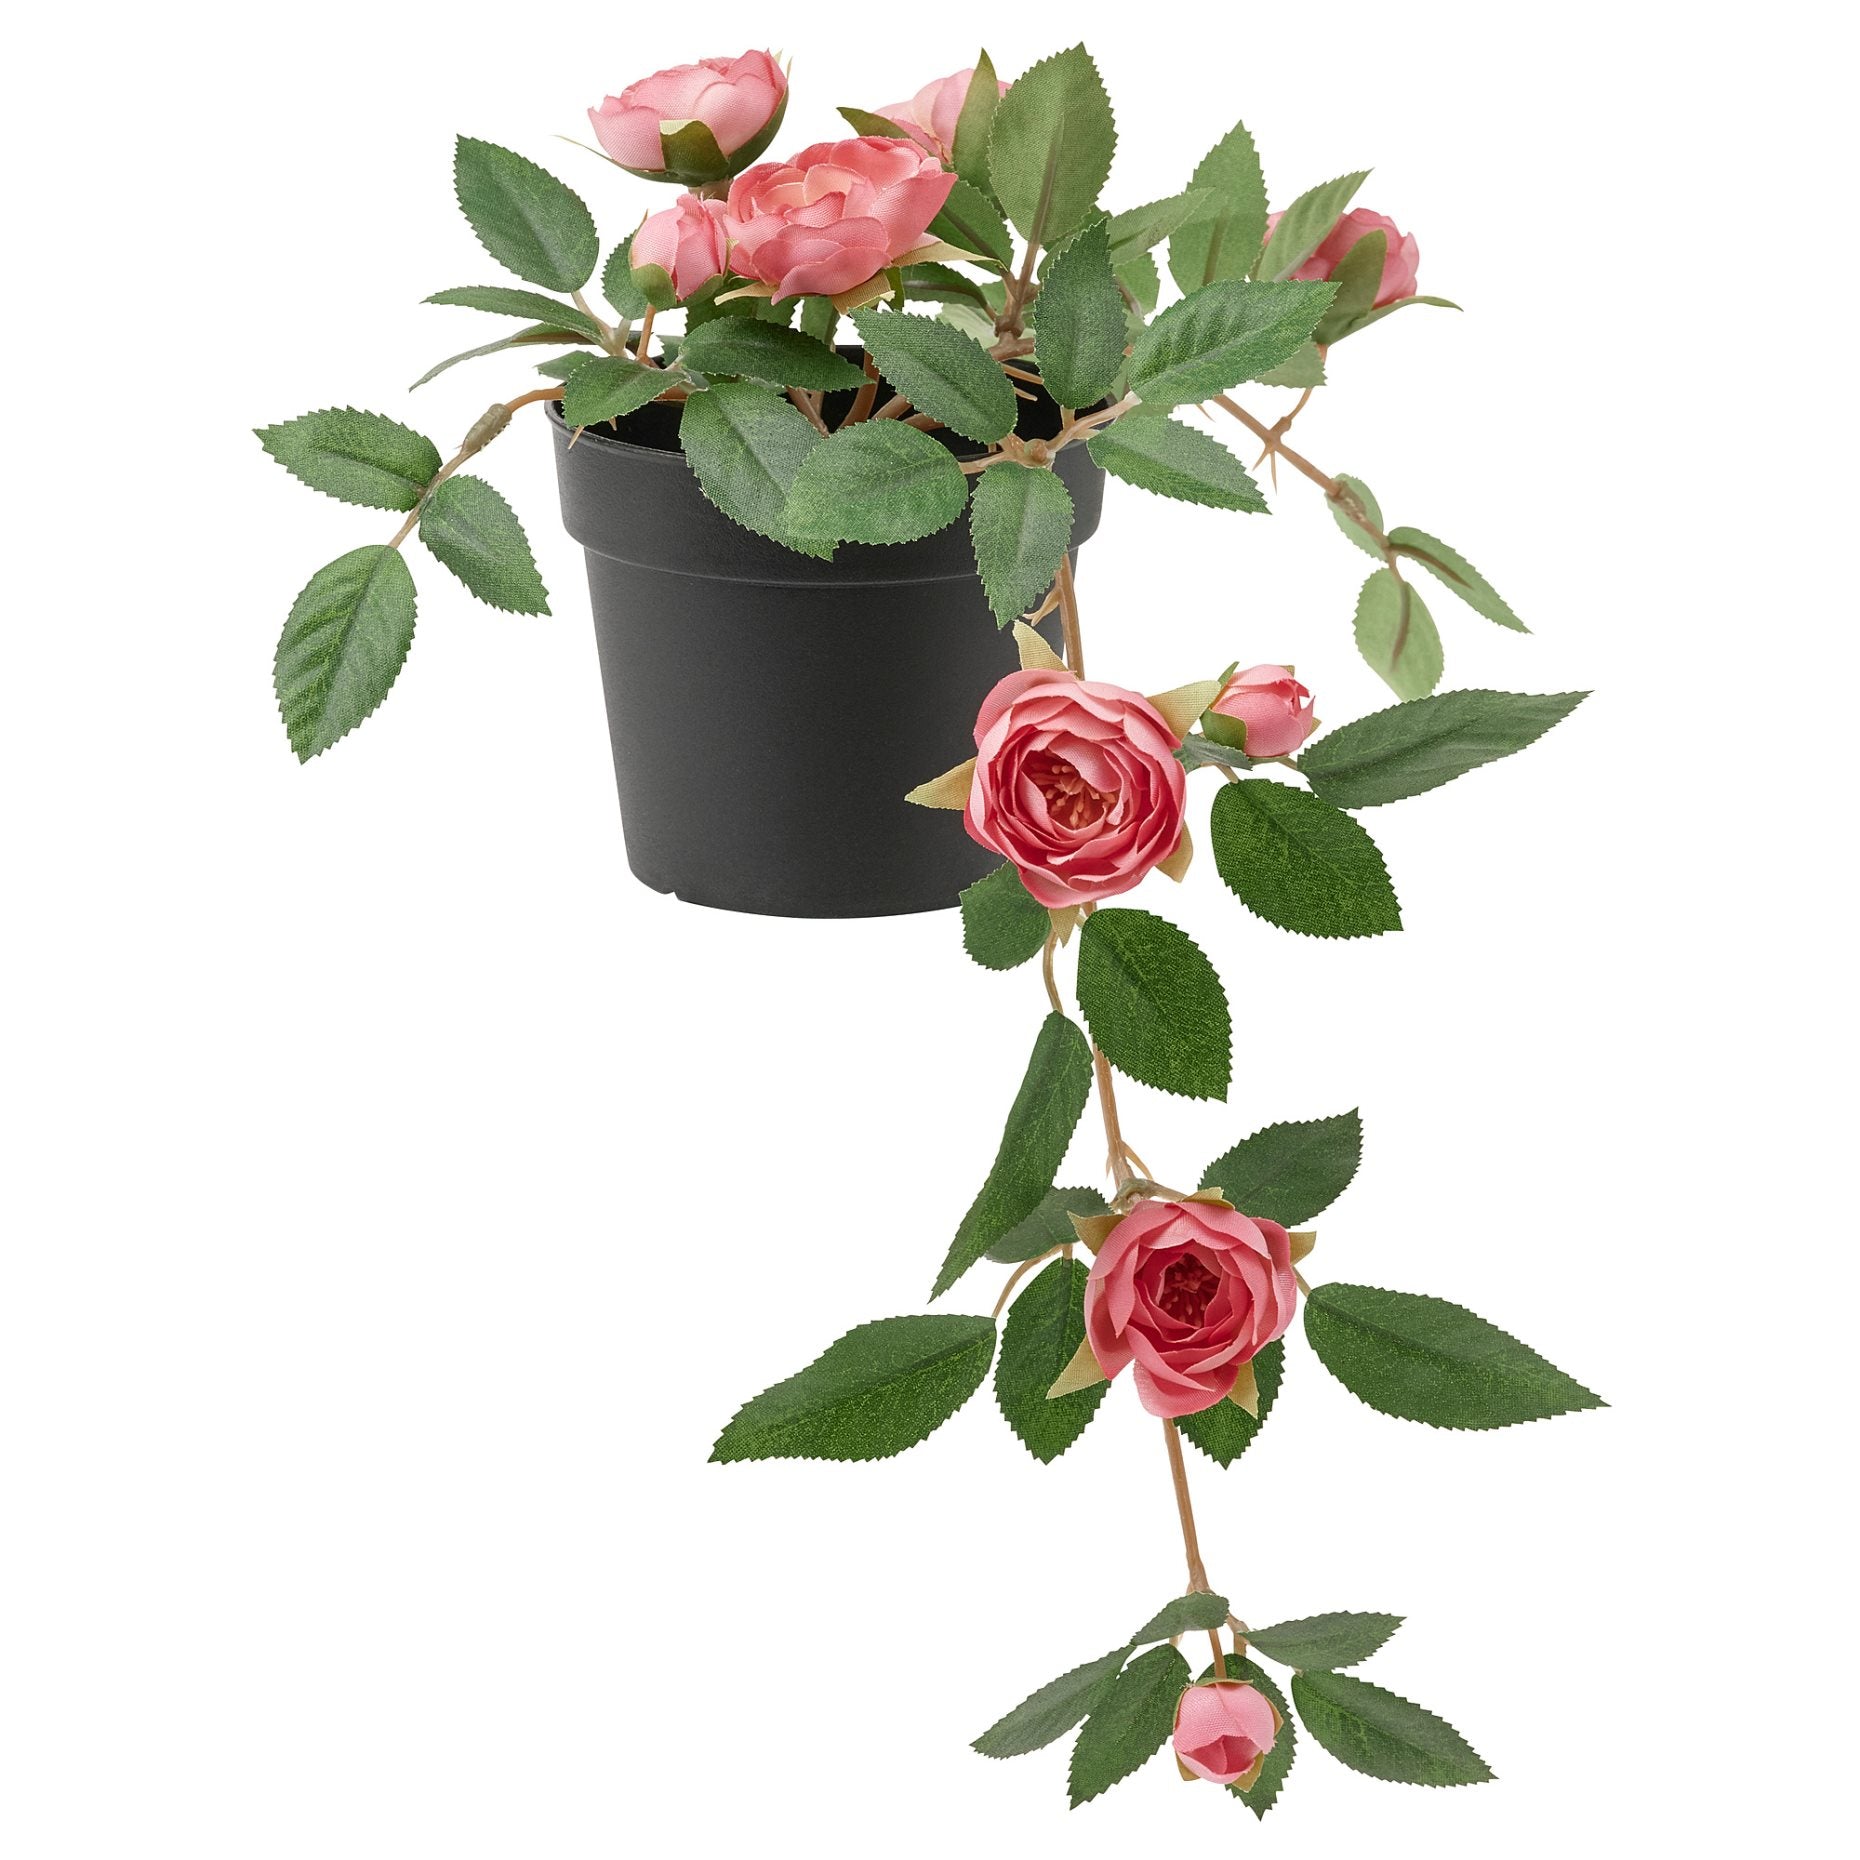 IKEA FEJKA Artificial Potted Plant, in-Outdoor Rose-Hanging Pink 9 cm